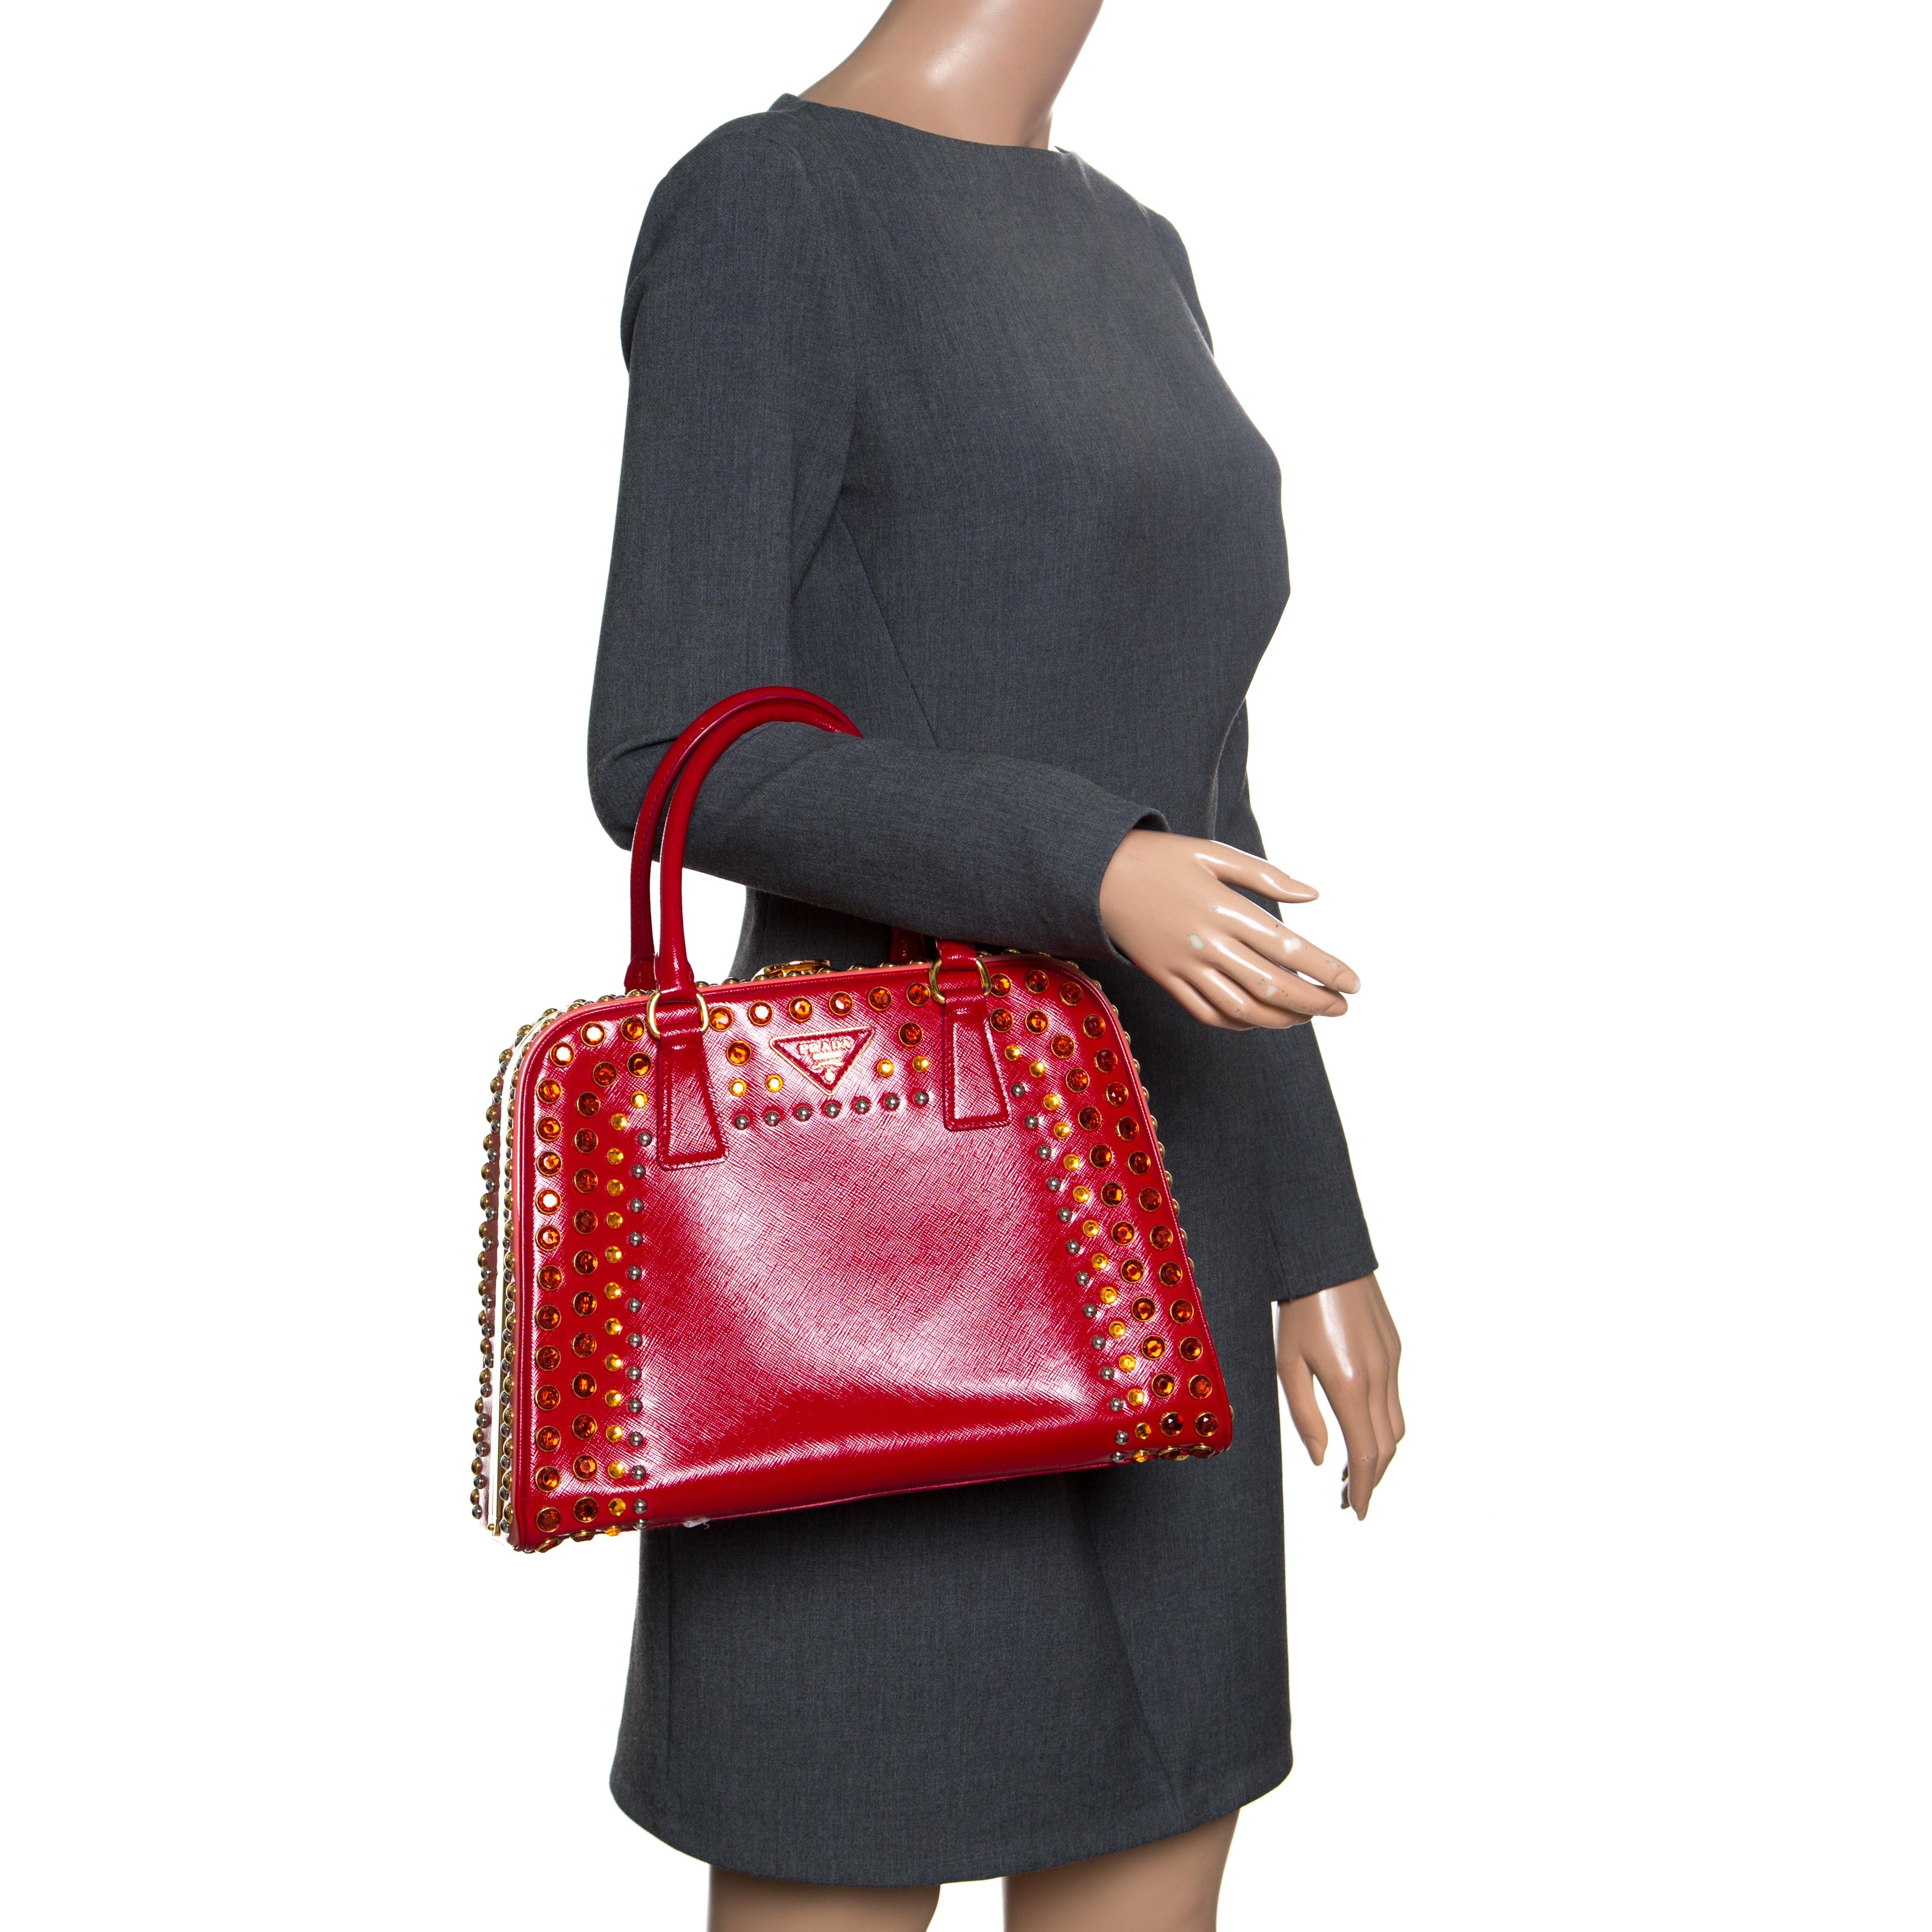 This marvelously designed top handle bag from Prada is the epitome of charm and style. Everything about the bag speaks opulence and a glamorous finish. Sculpted in a pyramid frame style, the bag is crafted from shiny red patent leather with